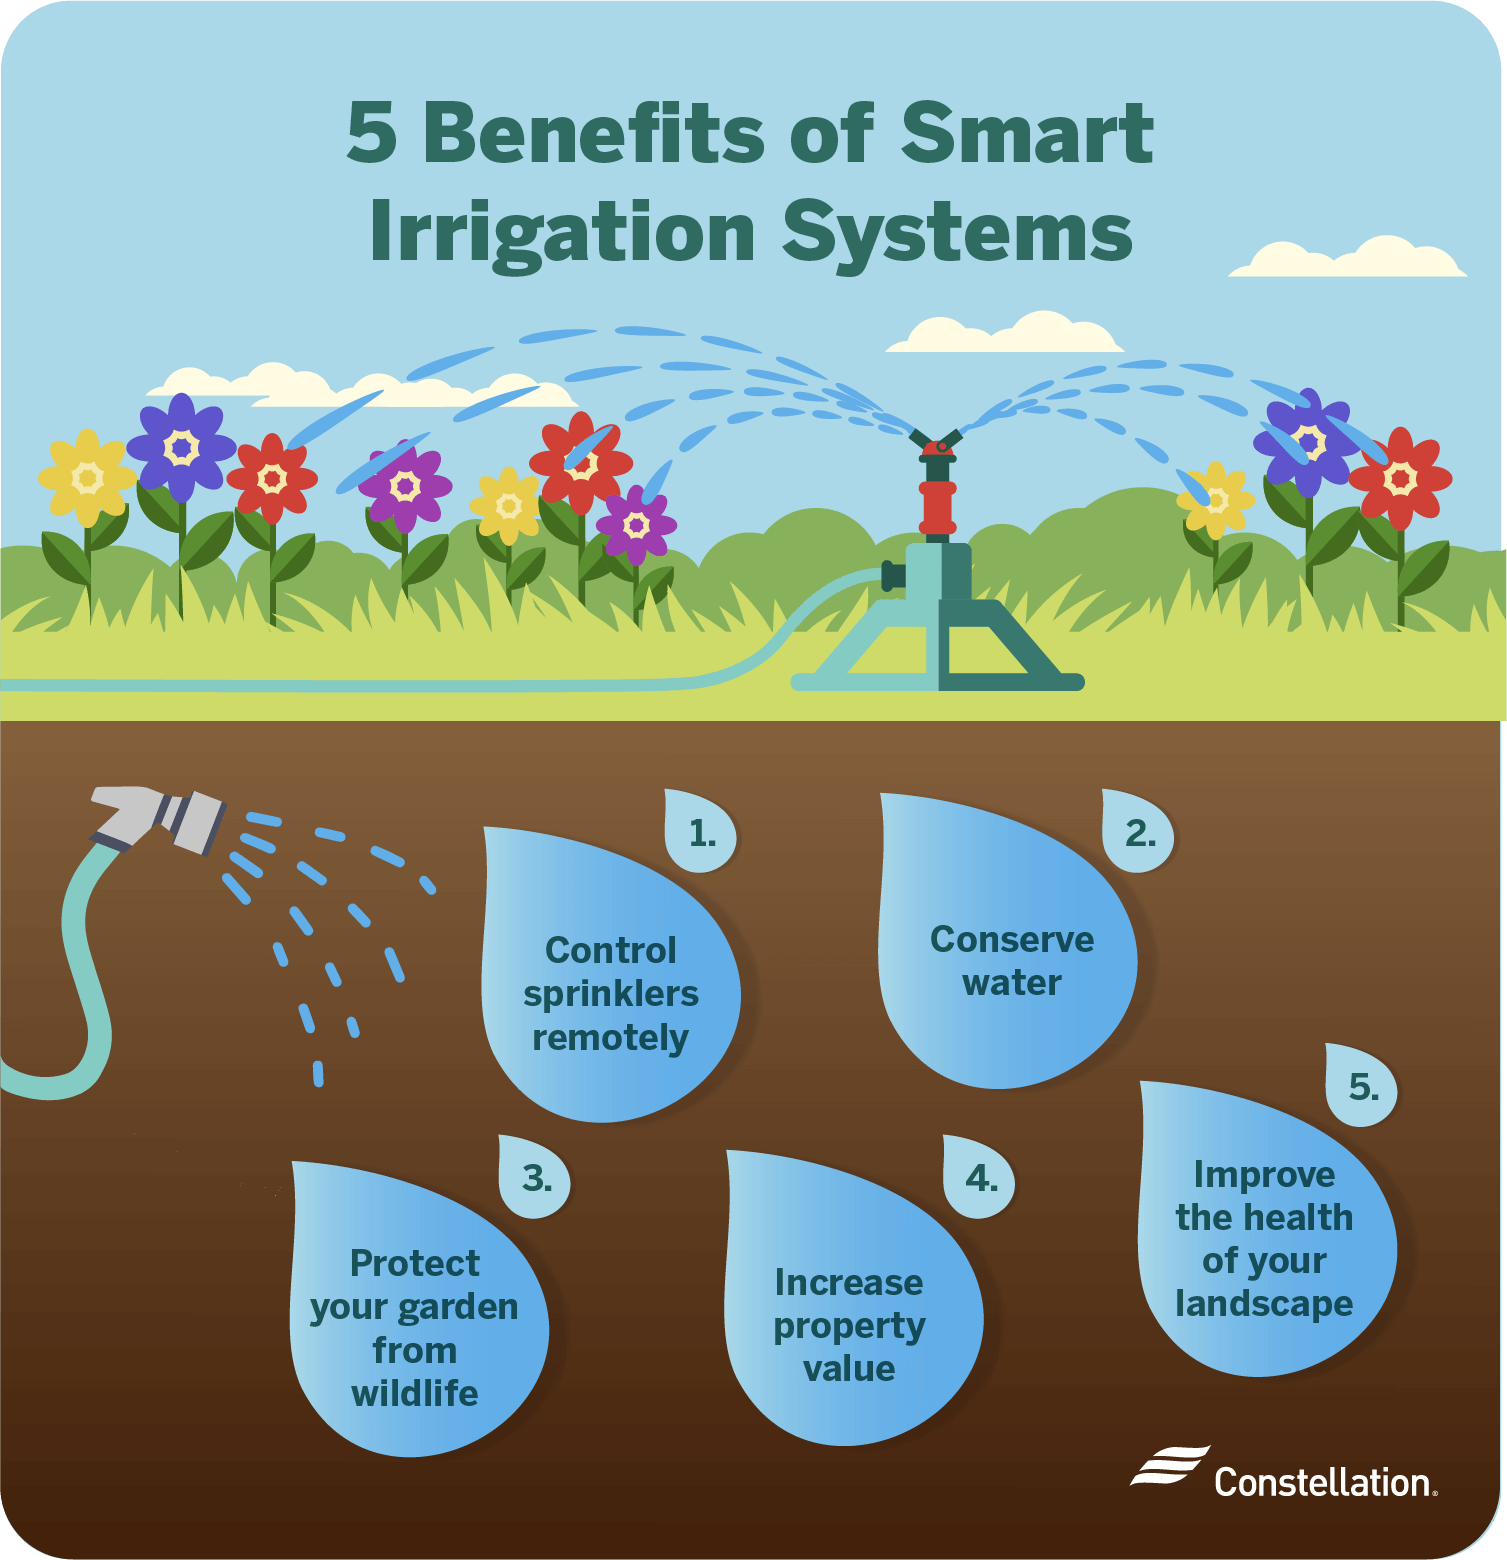 Benefits of smart irrigation systems.